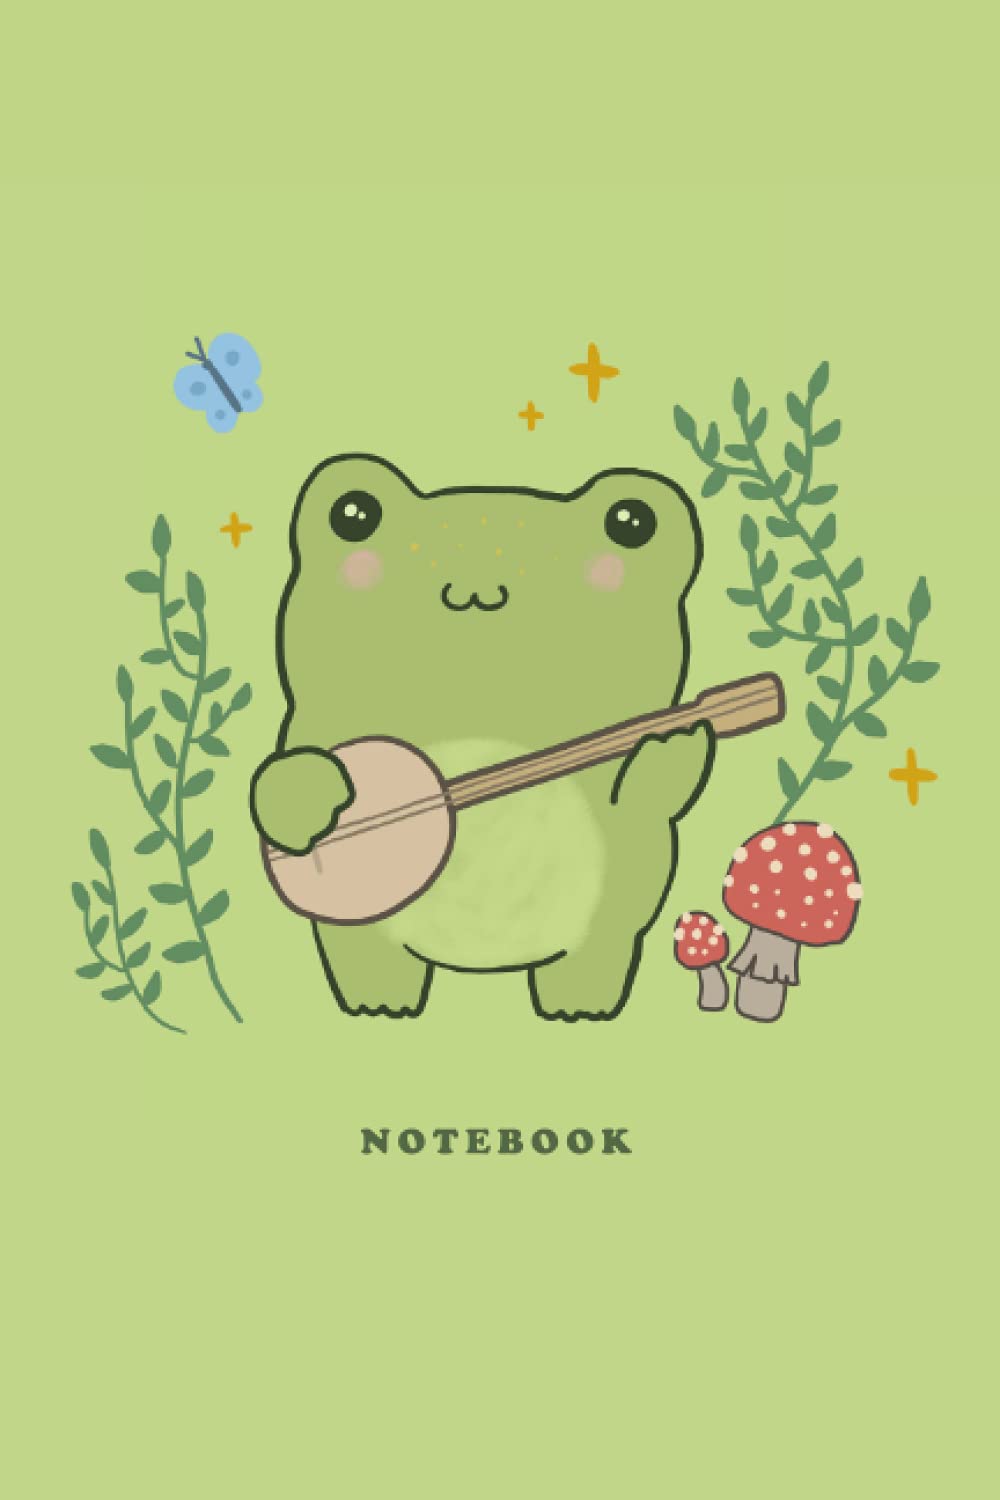 Notebook: Cute Cottagecore Frog Playing Banjo & Mushrooms. Graph Paper Journal. Illustrated Light Green Kawaii Aesthetic Diary: Amazon.co.uk: Frogs, Ministry of: 9798527739633: Books